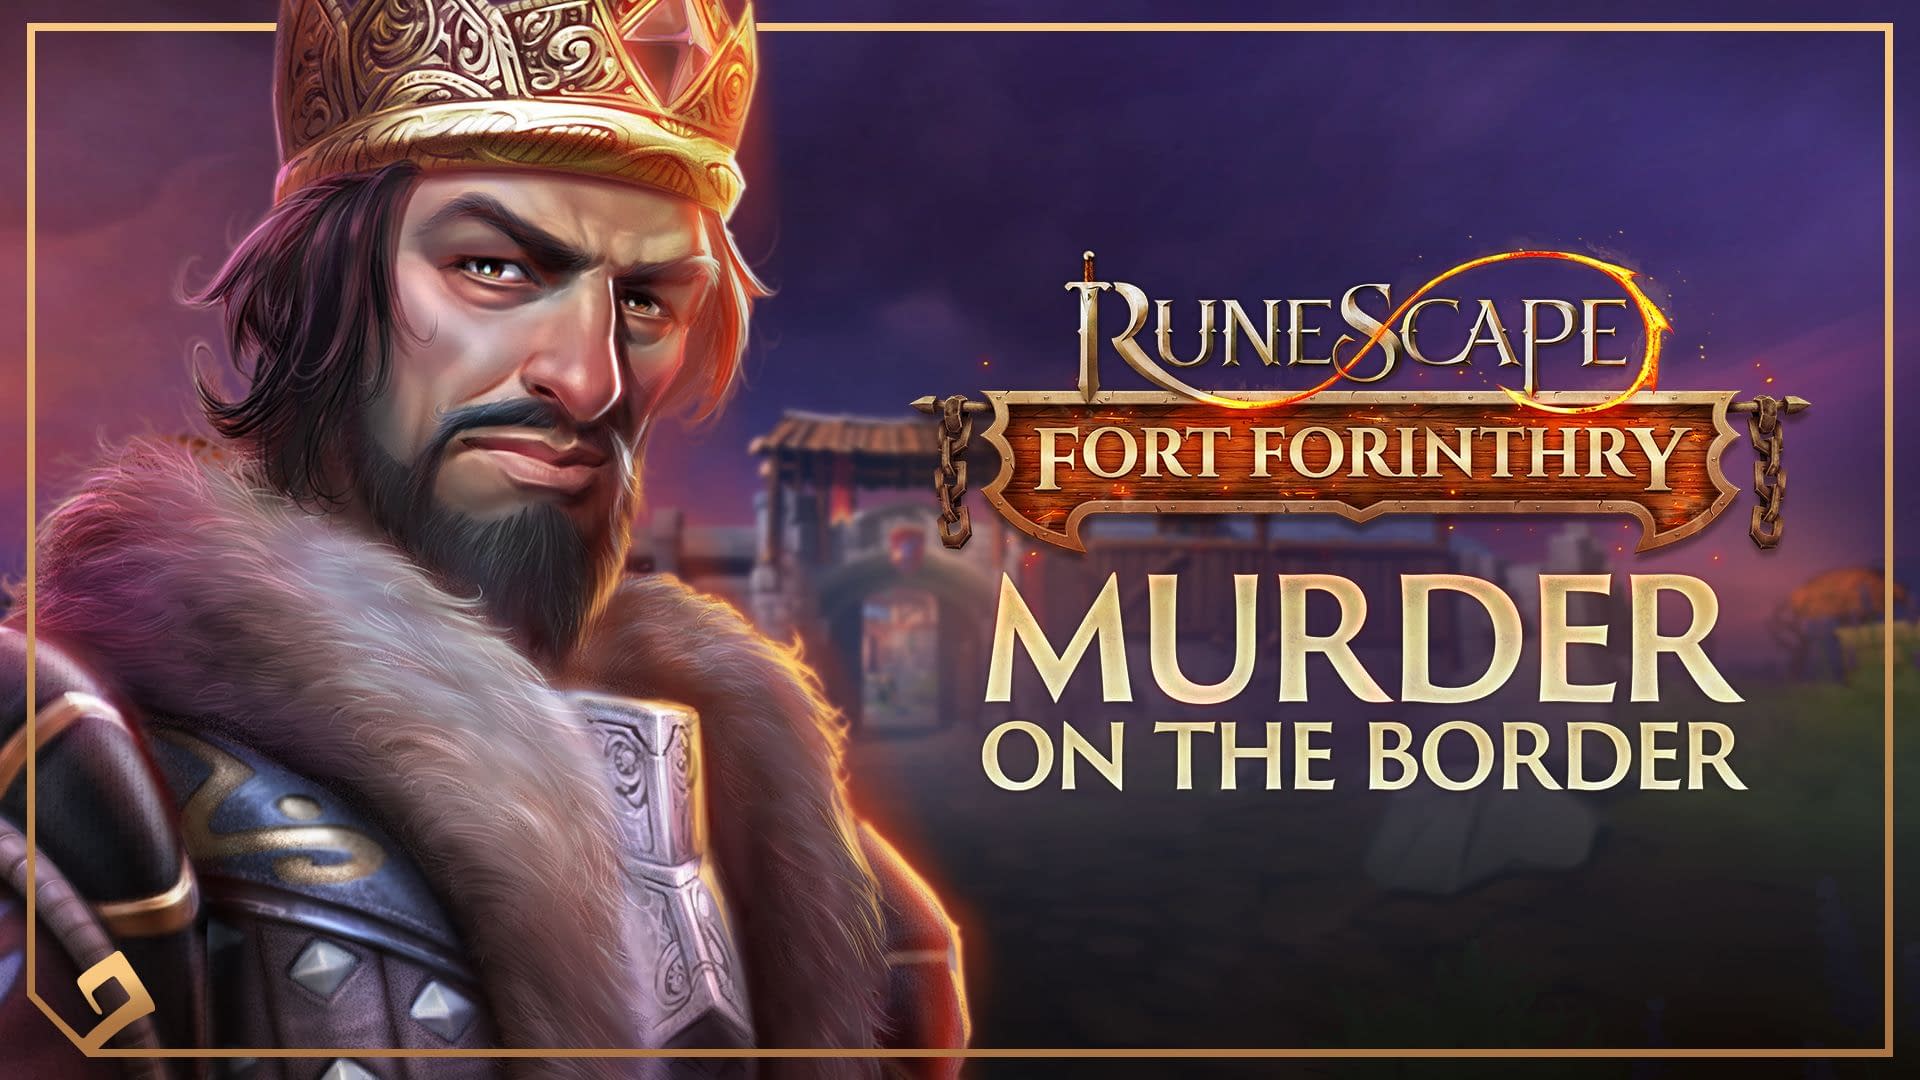 Update:Dead and Buried - Fort Forinthry Season Update - The RuneScape Wiki